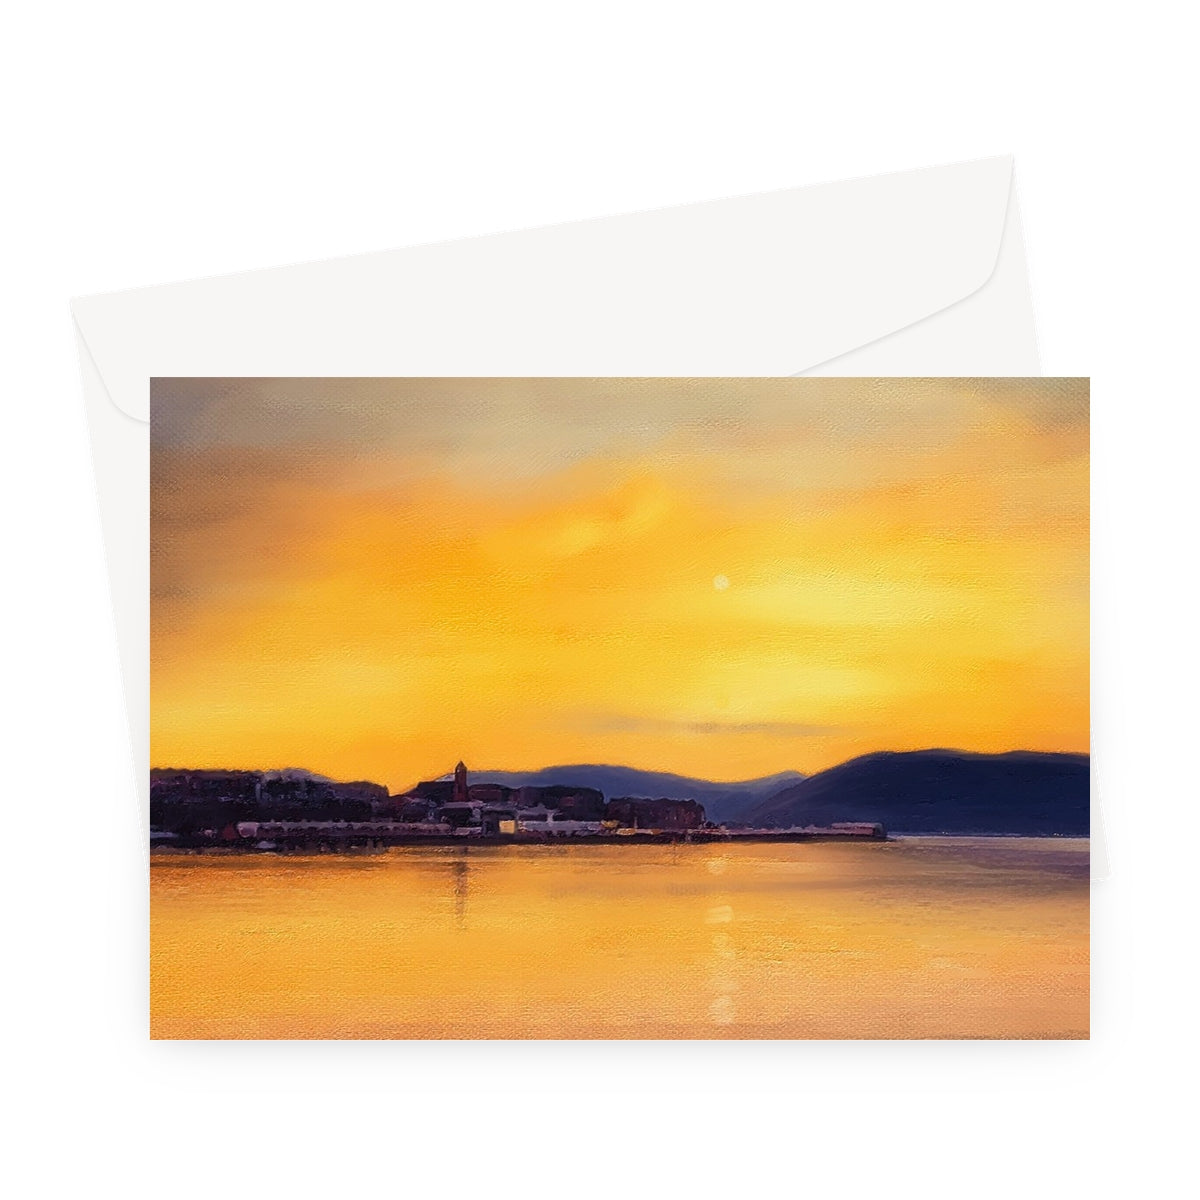 Gourock From Cardwell Bay Art Gifts Greeting Card-Greetings Cards-River Clyde Art Gallery-A5 Landscape-1 Card-Paintings, Prints, Homeware, Art Gifts From Scotland By Scottish Artist Kevin Hunter